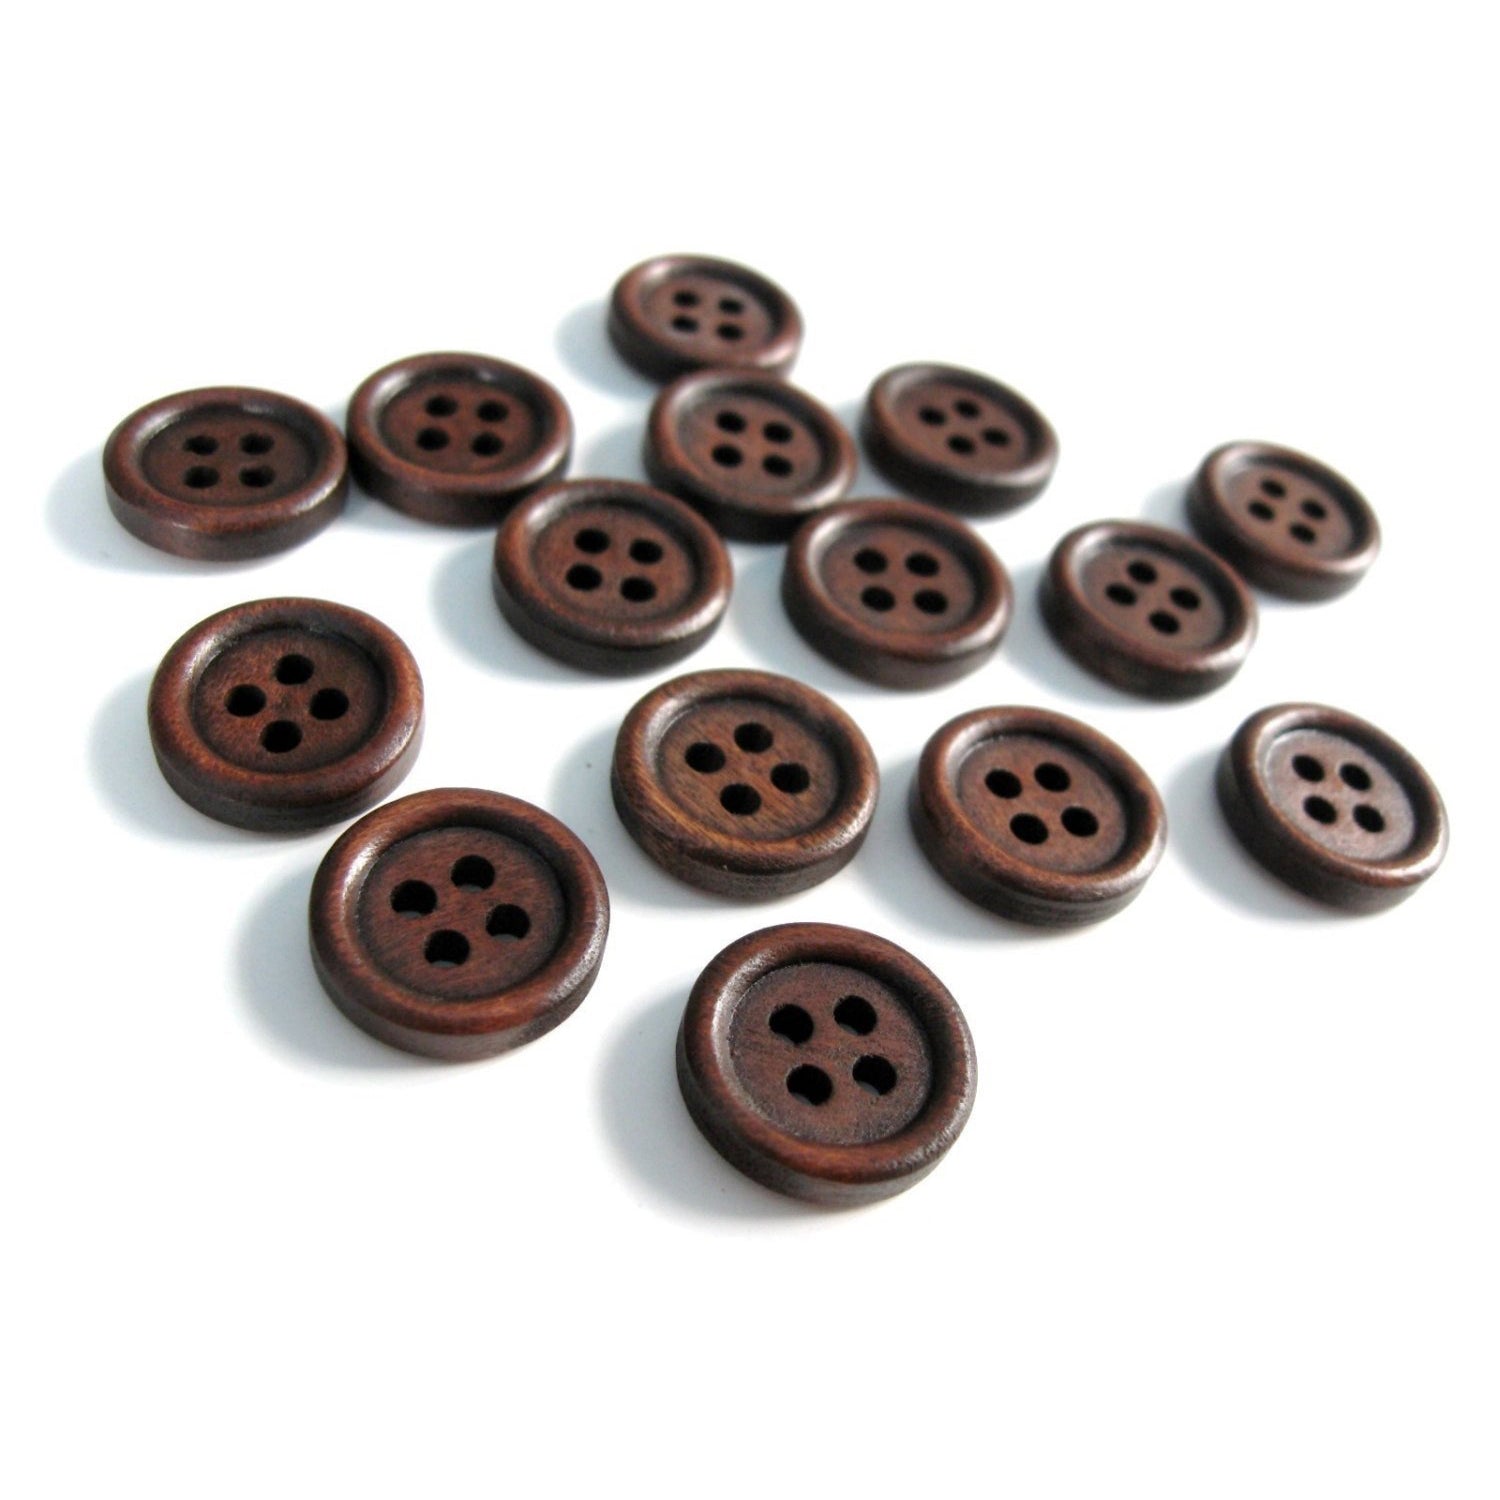 50 Pcs 20mm Wooden Buttons, 0.79 inch Premium Buttons for Sewing Craft Clothing, Brown Color, Natural Chestnut Made, Round 4 Hole